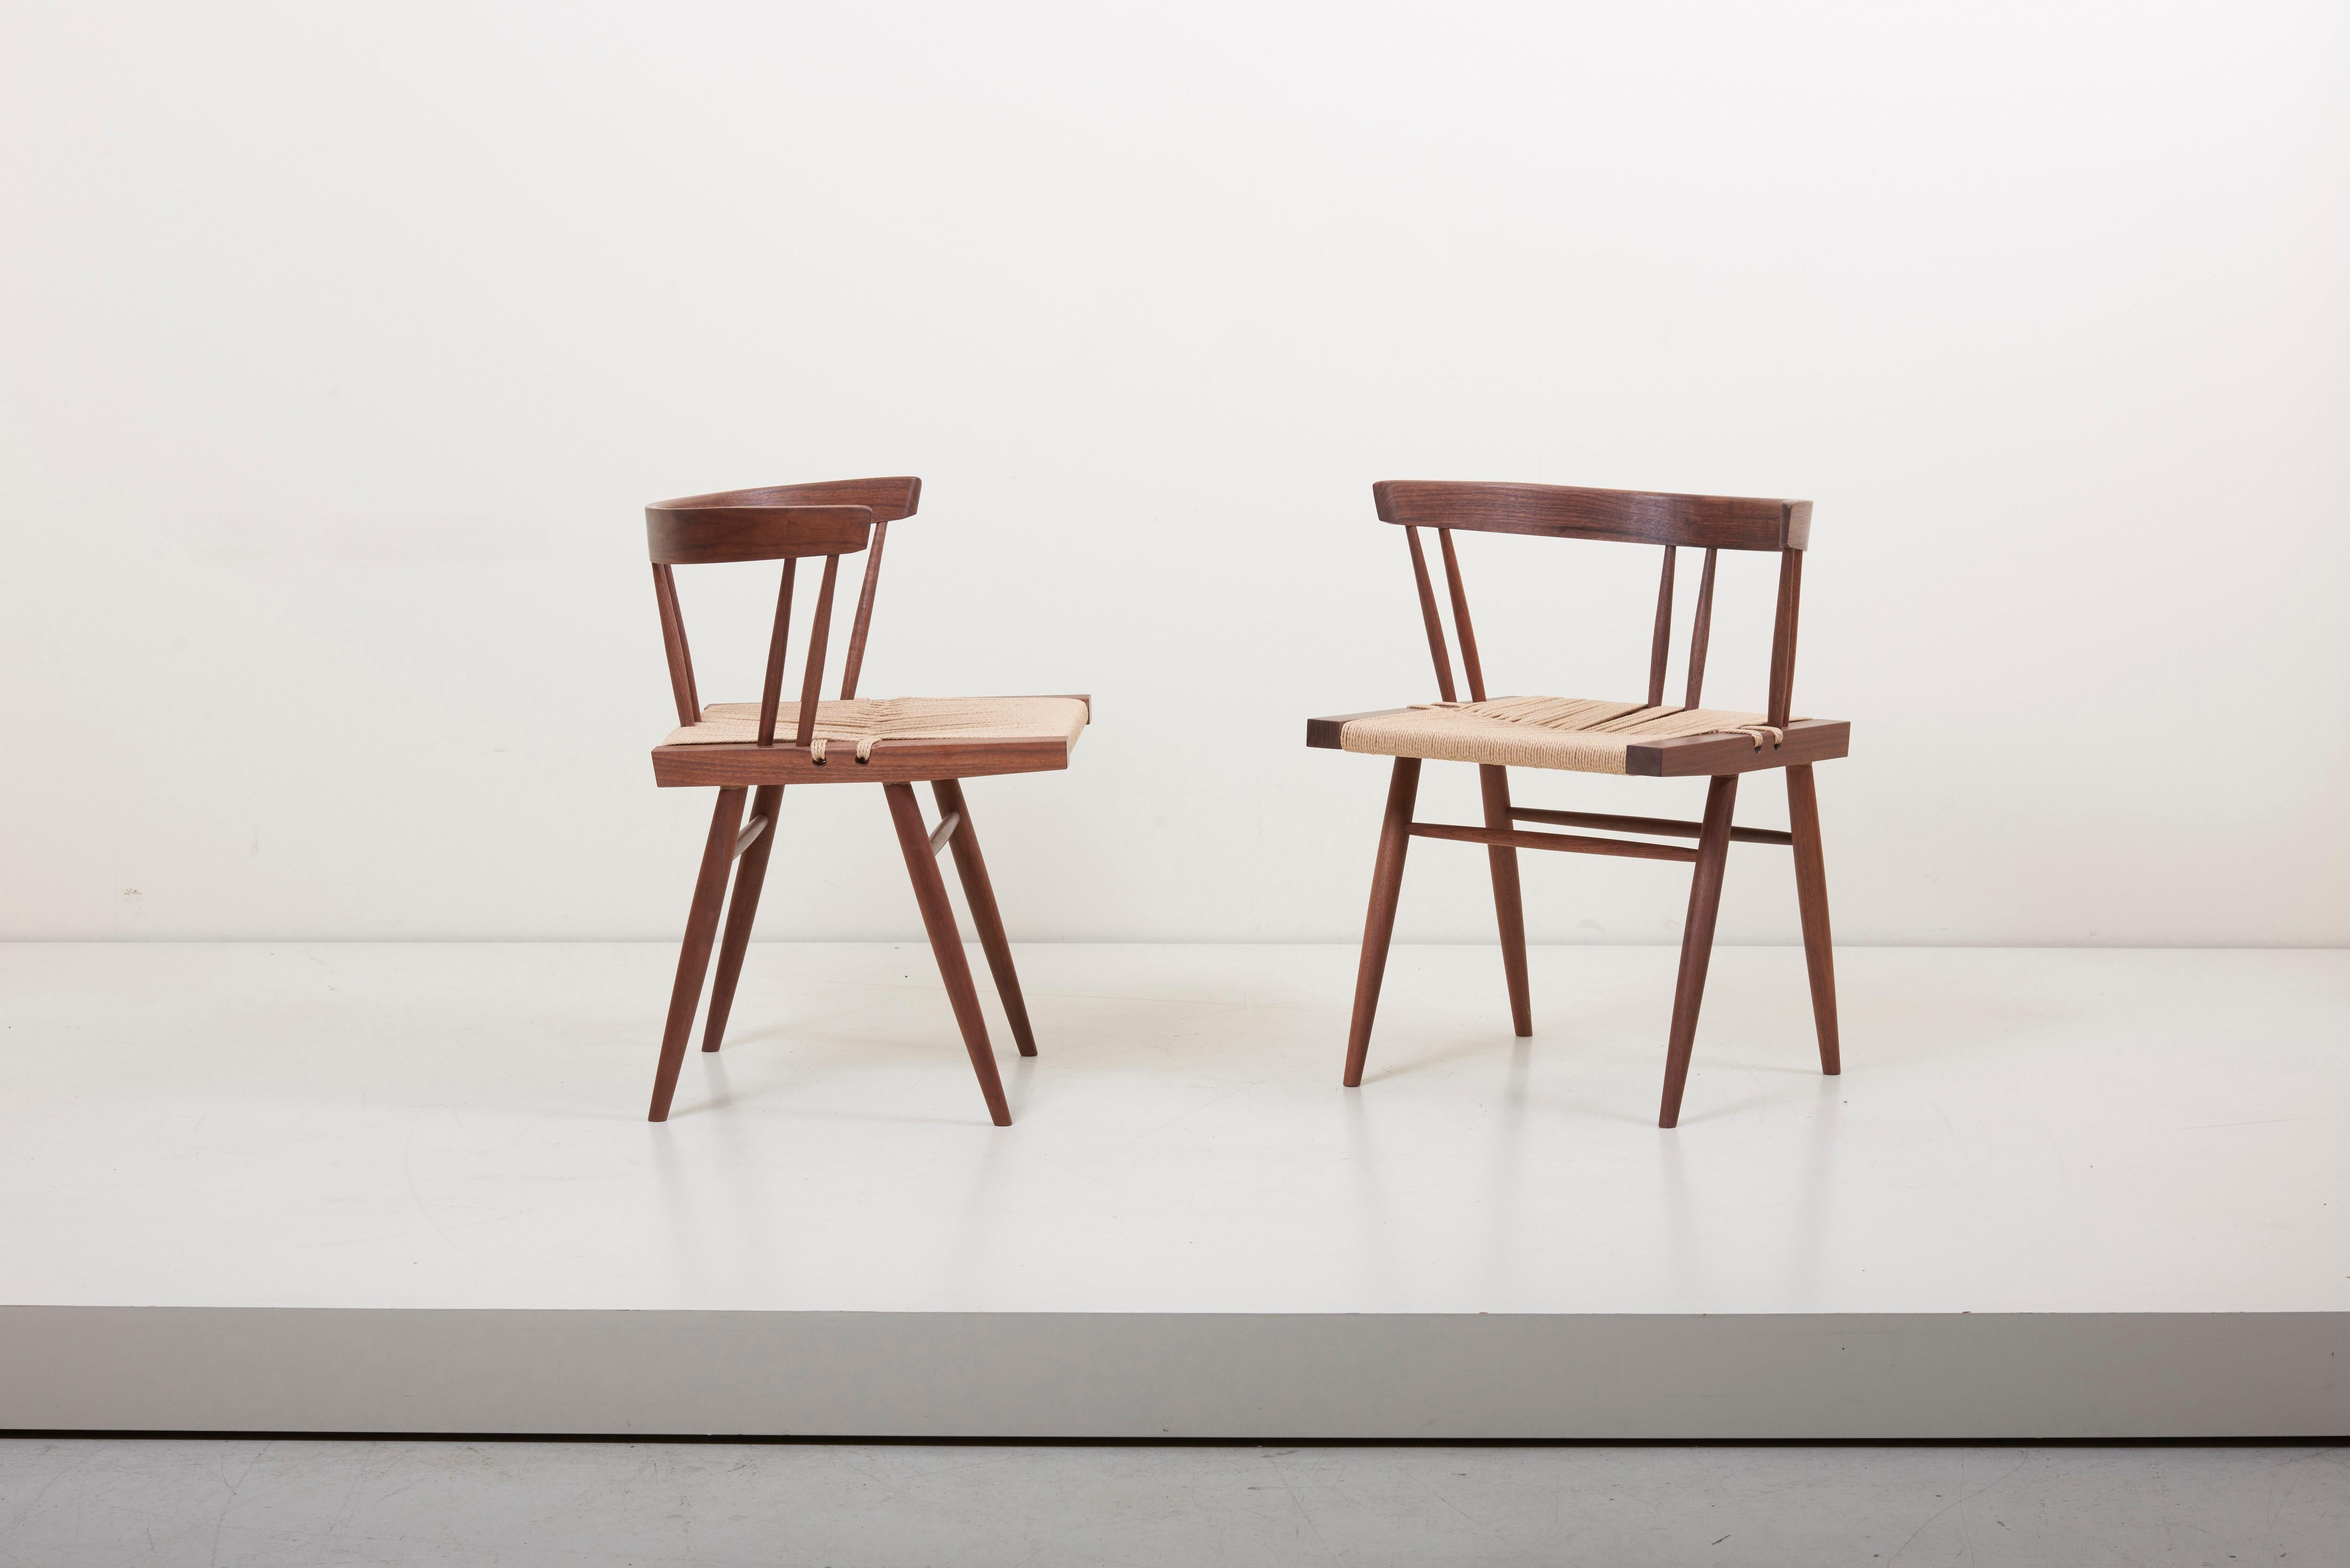 Pair of Grass-seated chairs, designed by George Nakashima and manufactured by George Nakashima Studio in the US. The square seat typically found in walnut and woven sea-grass. Outstanding quality.